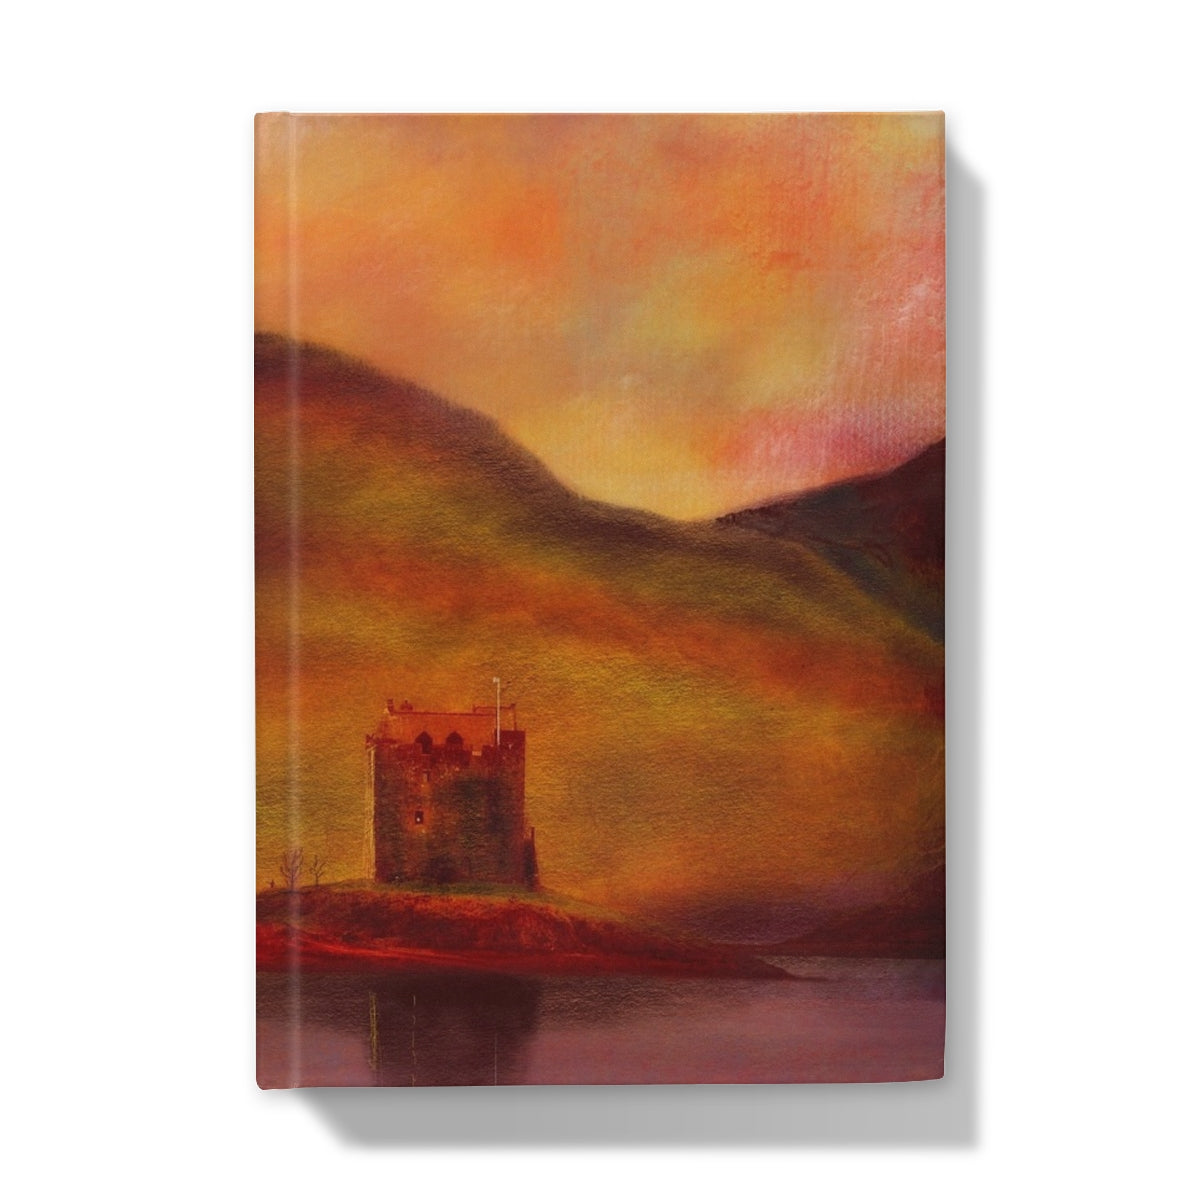 Castle Stalker Sunset Art Gifts Hardback Journal-Journals & Notebooks-Historic & Iconic Scotland Art Gallery-A5-Lined-Paintings, Prints, Homeware, Art Gifts From Scotland By Scottish Artist Kevin Hunter